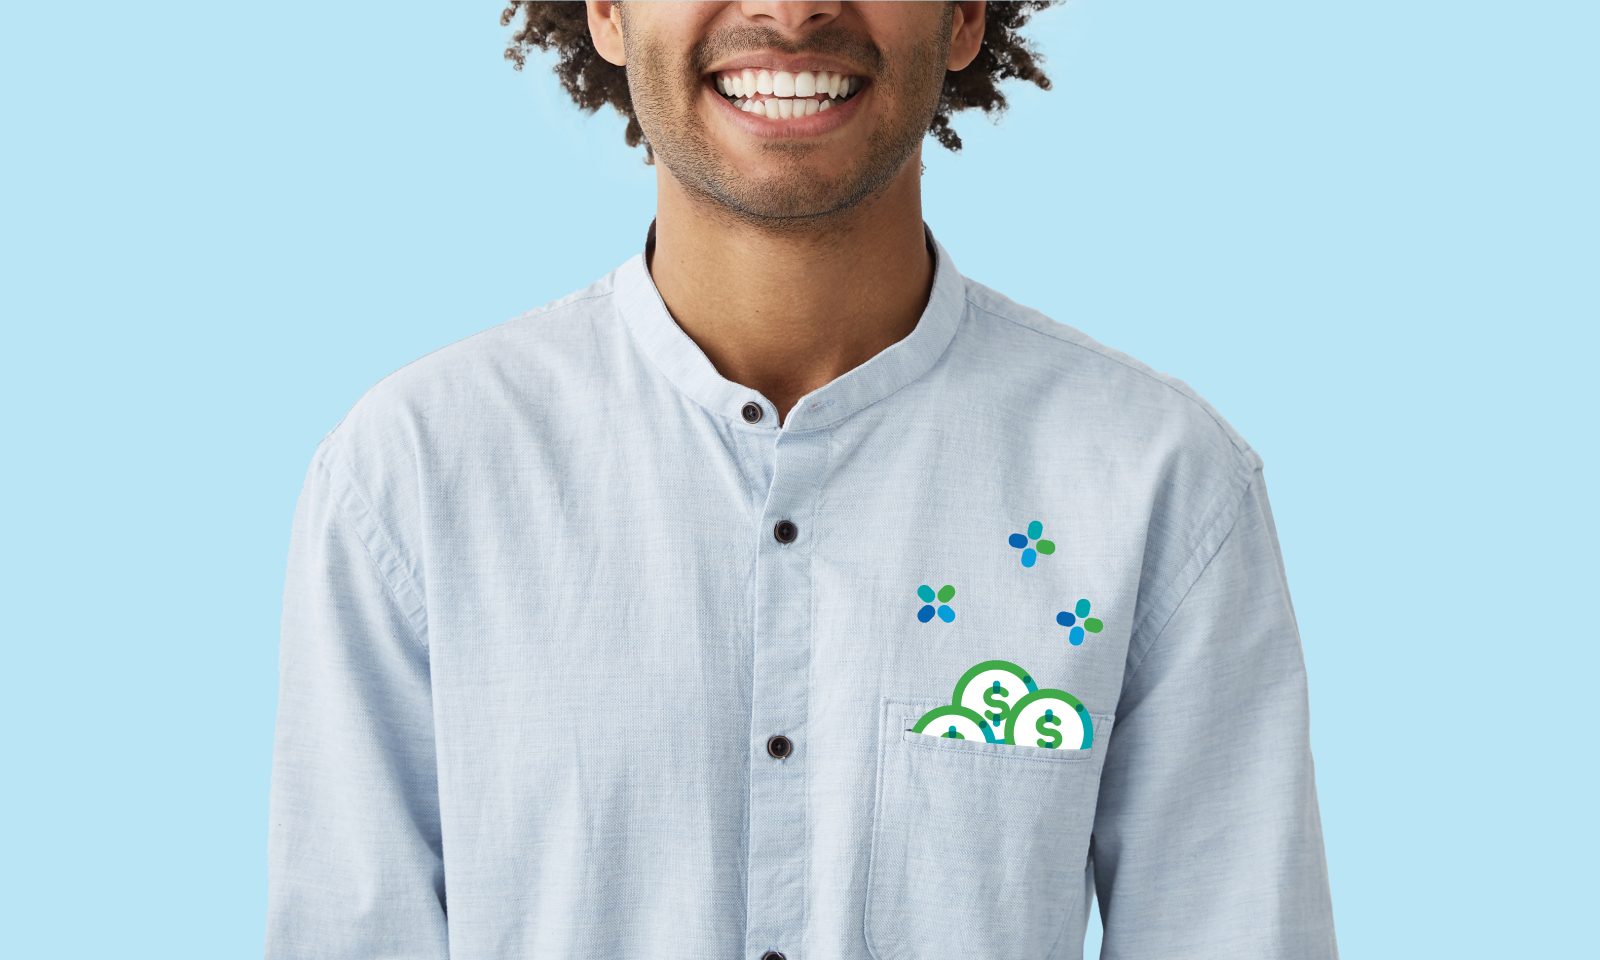 A smiling man with coins in his front shirt pocket